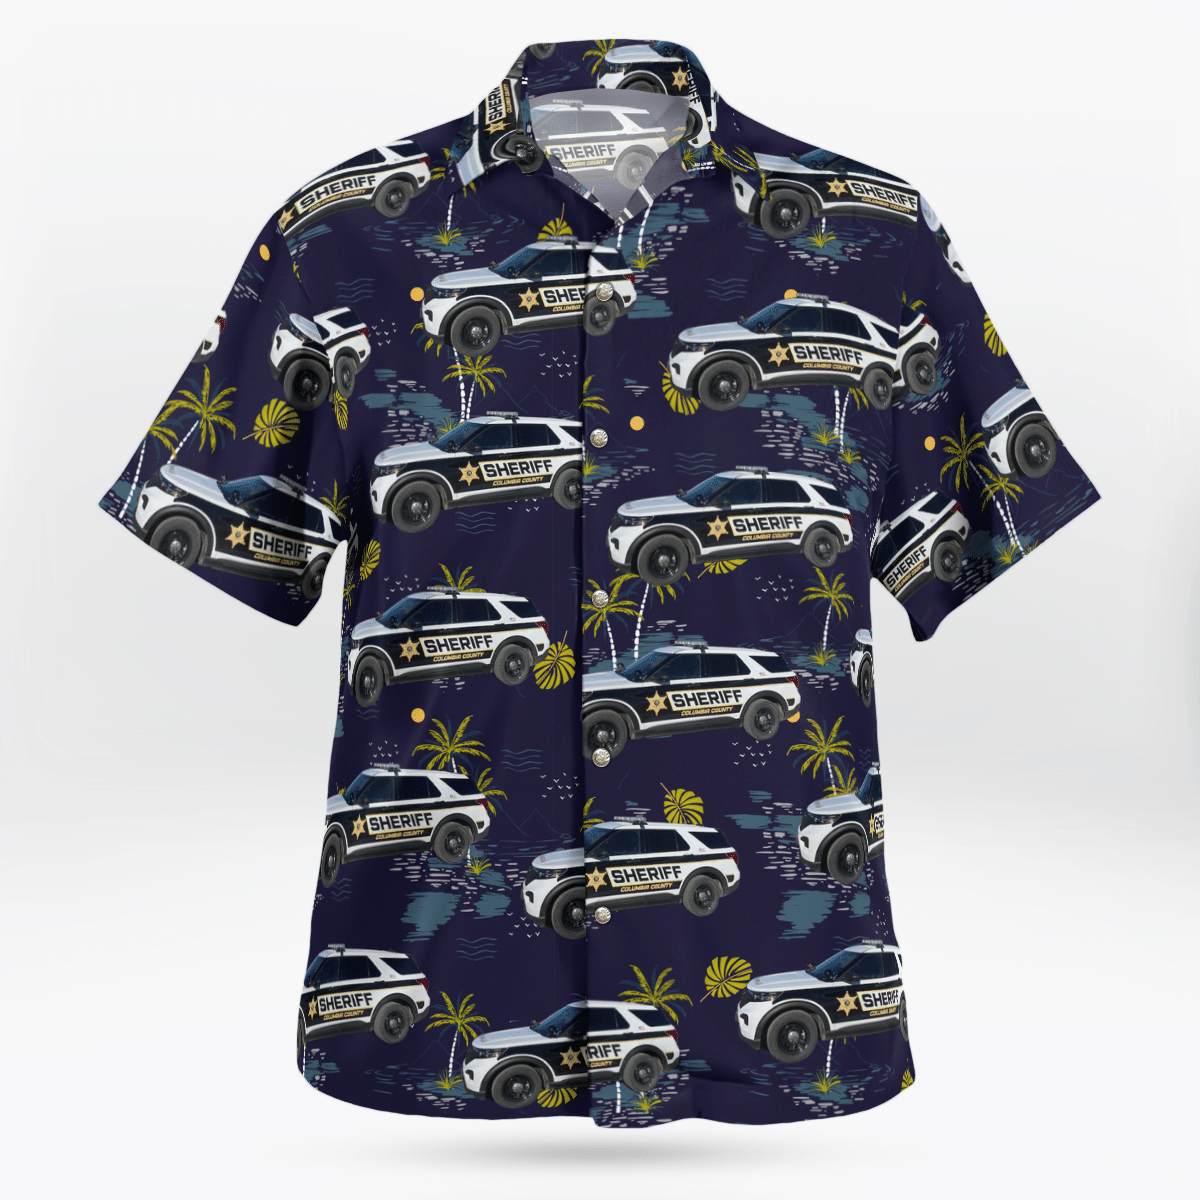 Hawaiian shirts never go out of style 23